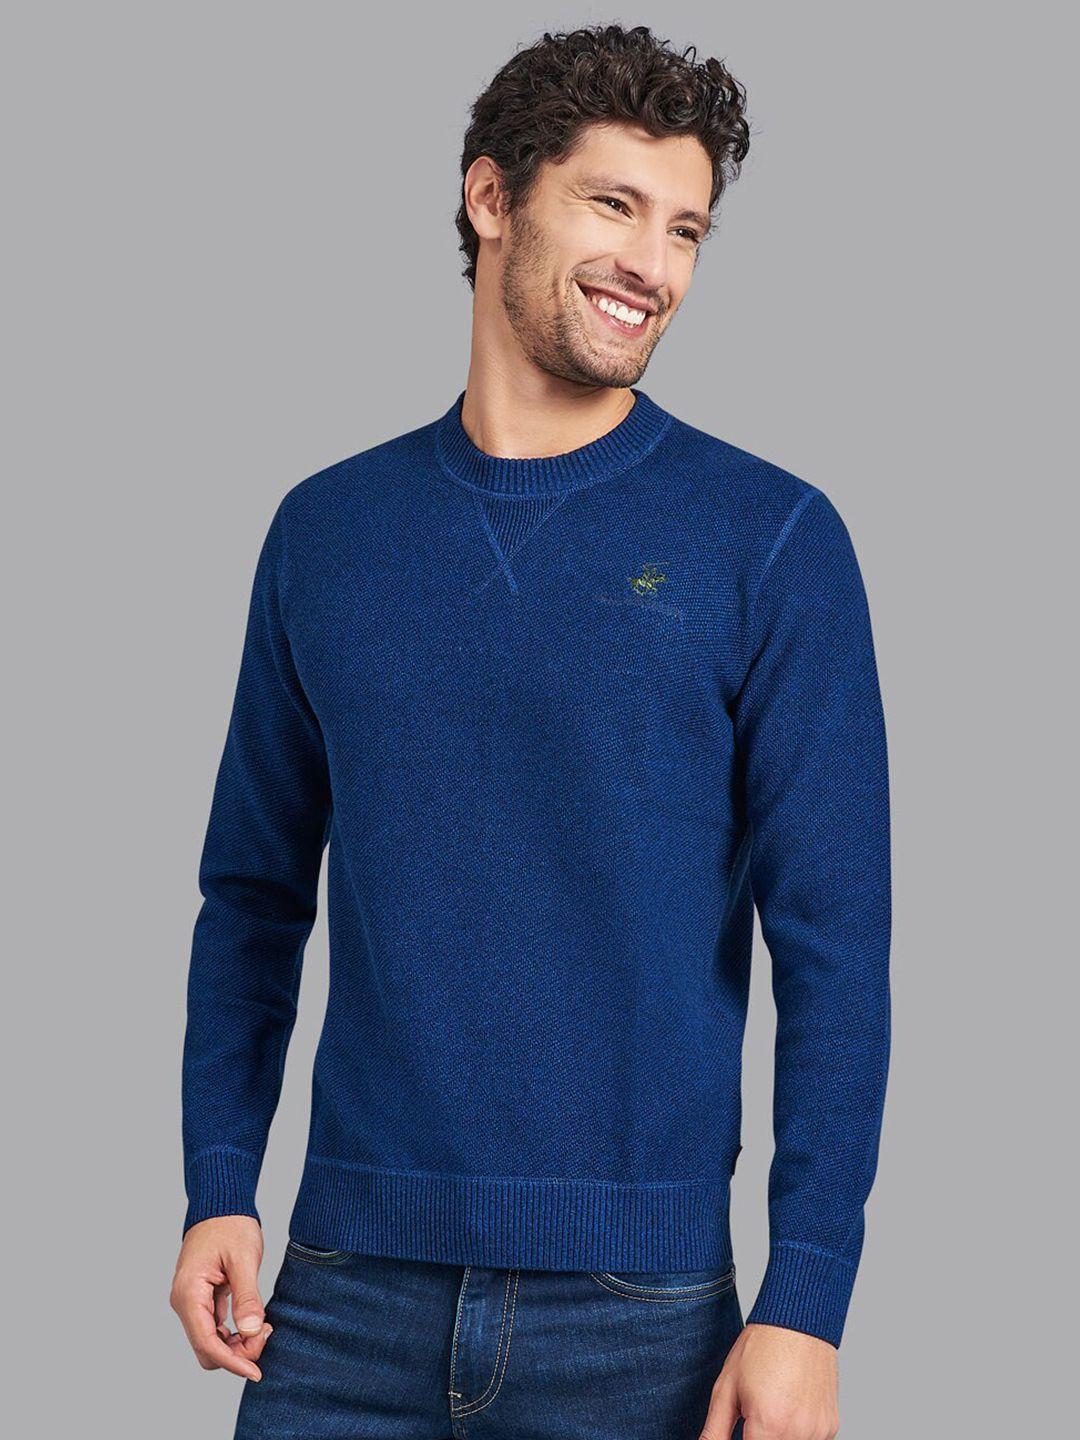 beverly-hills-polo-club-men-navy-blue-cotton-pullover